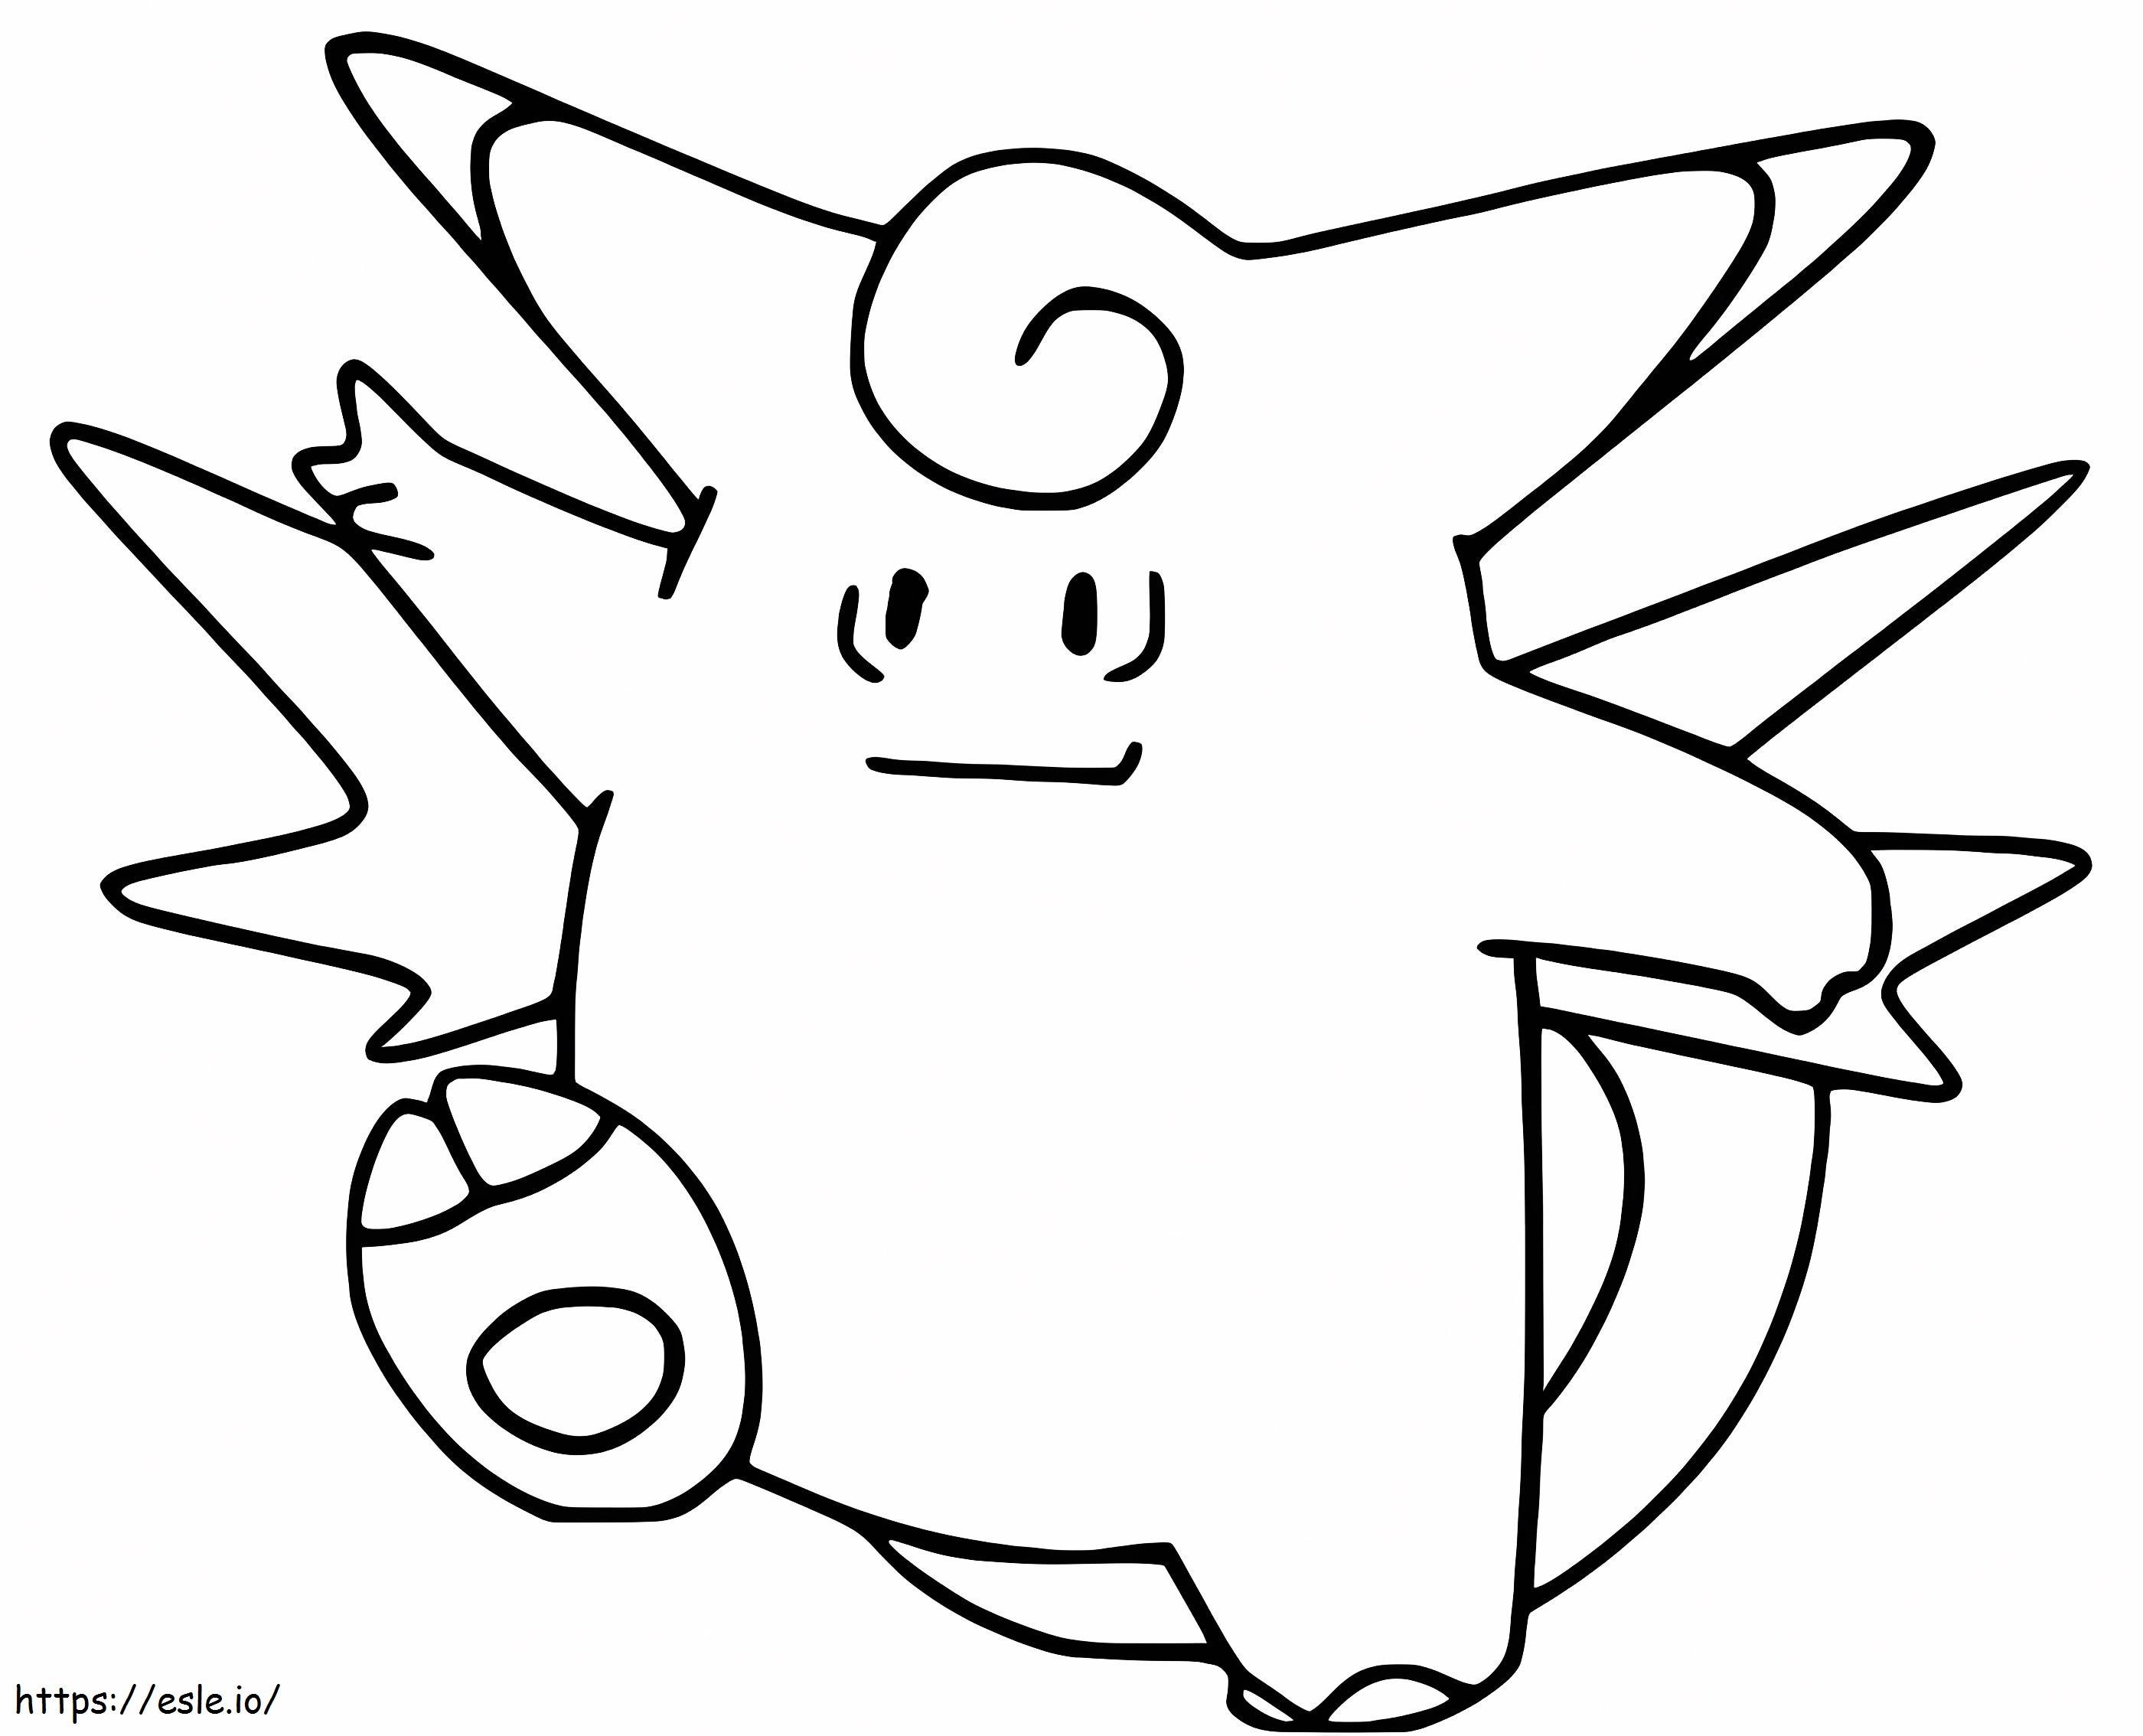 Clefable Pokemon coloring page